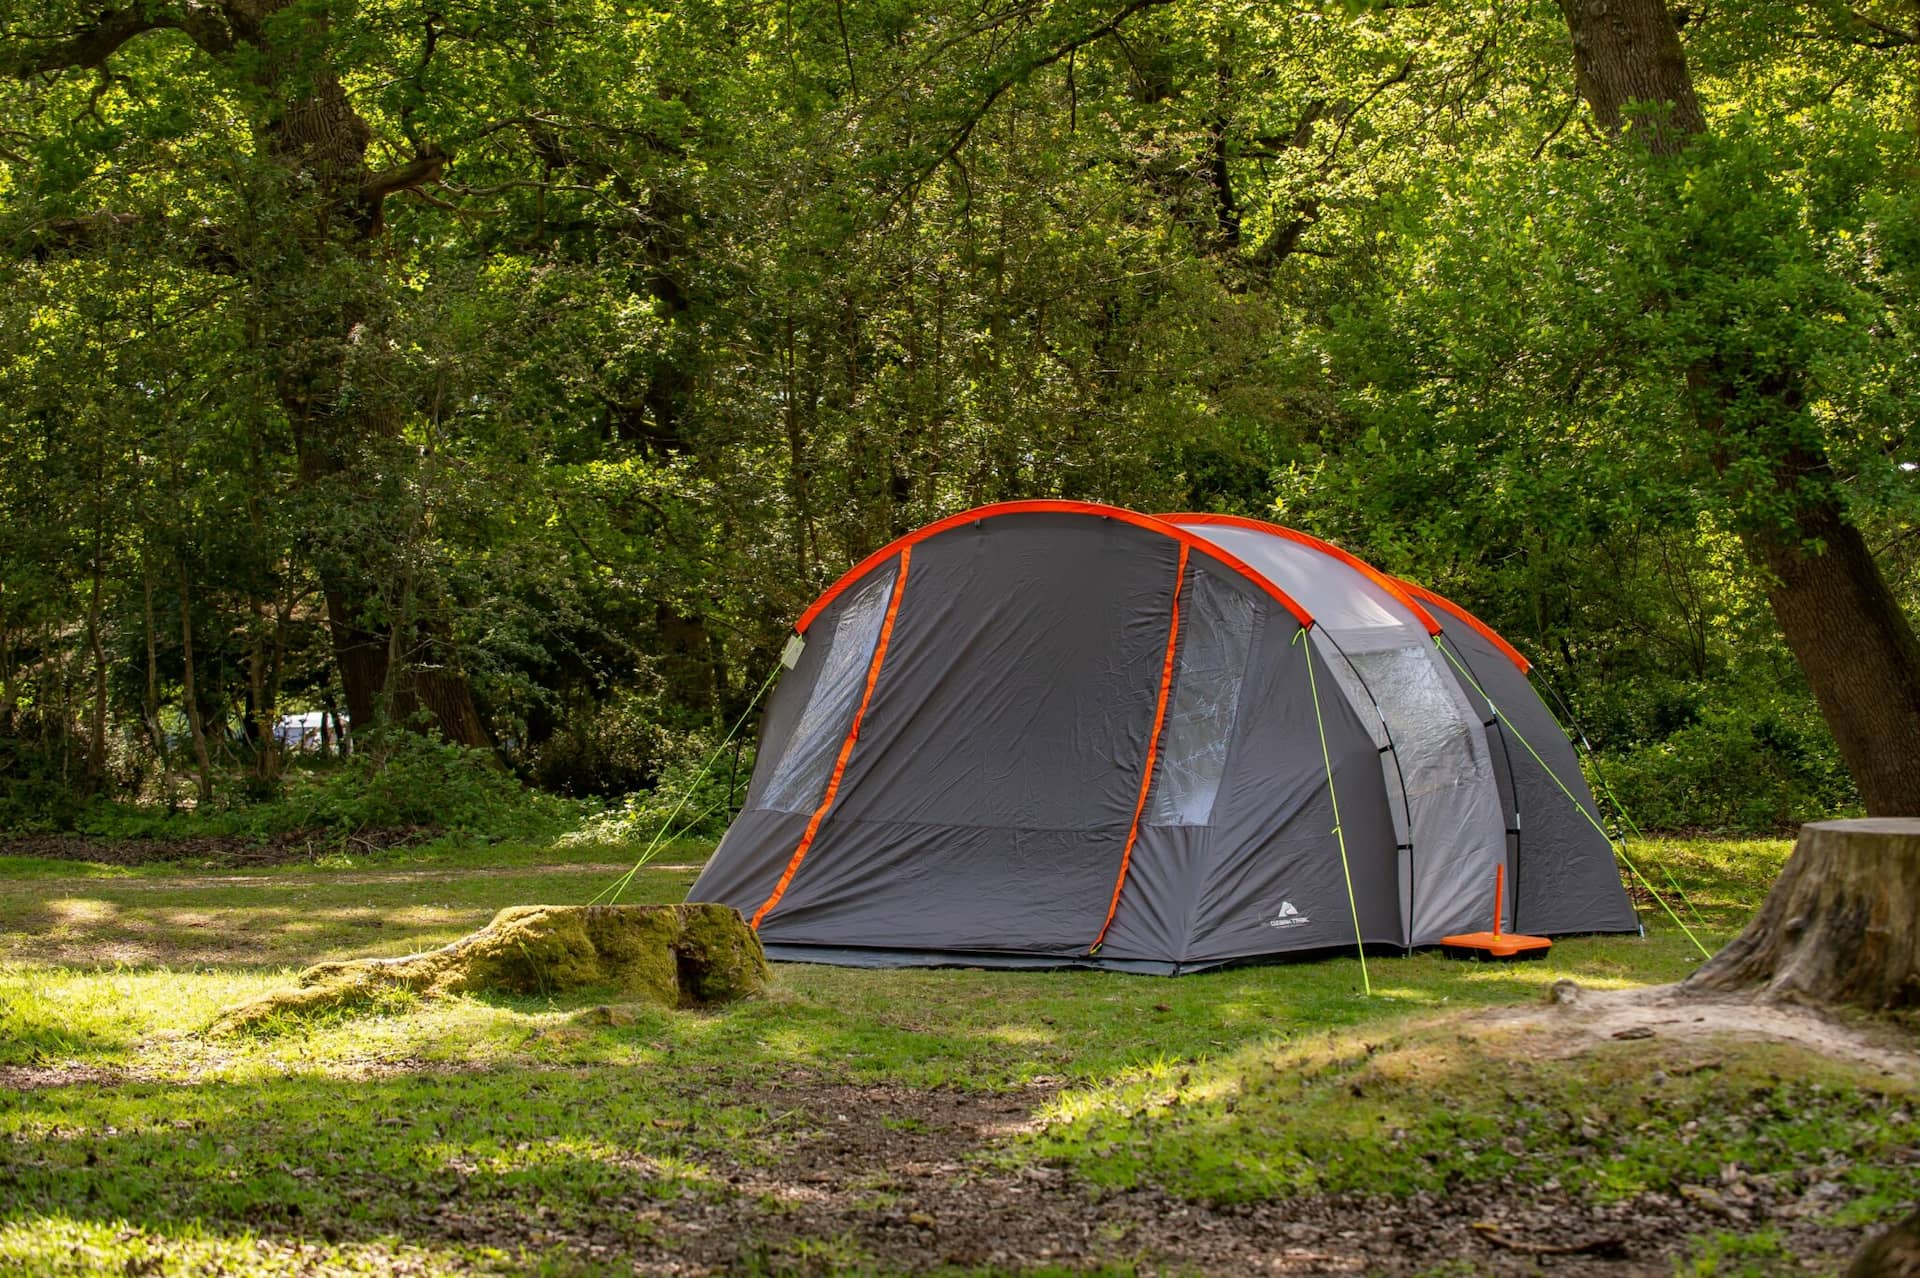 5 Beginner tips to make the most of your camping holiday